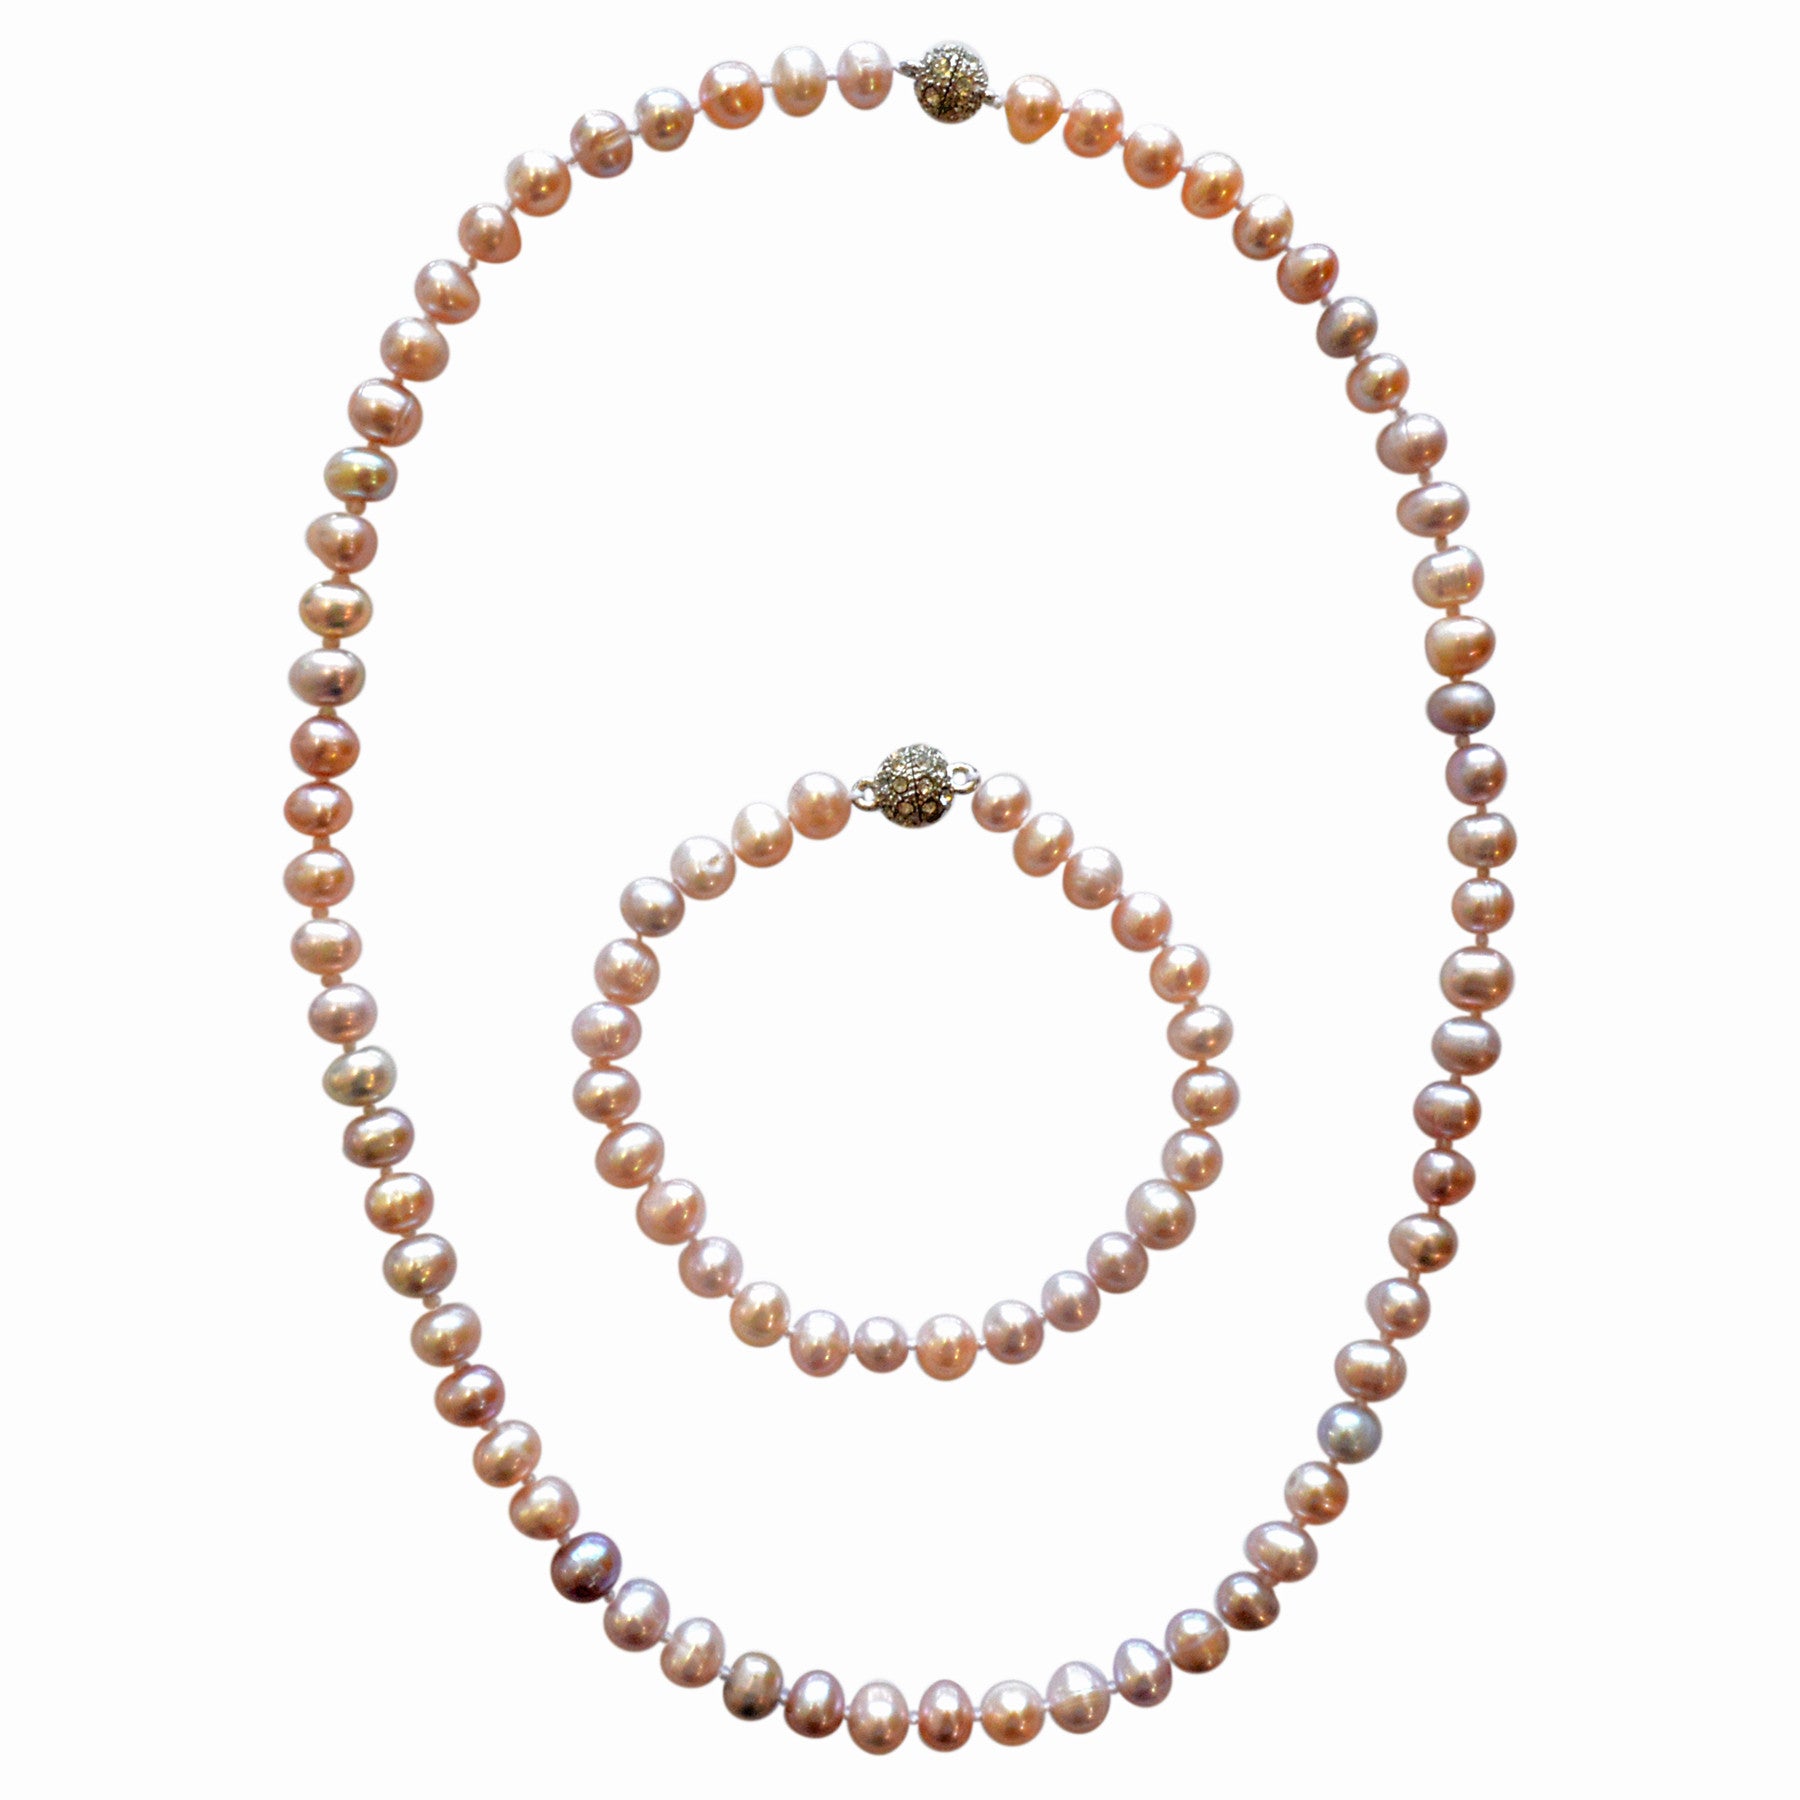 Spark cultured pearl Necklace with crystal magnetic clasp handmade fair trade blush pink